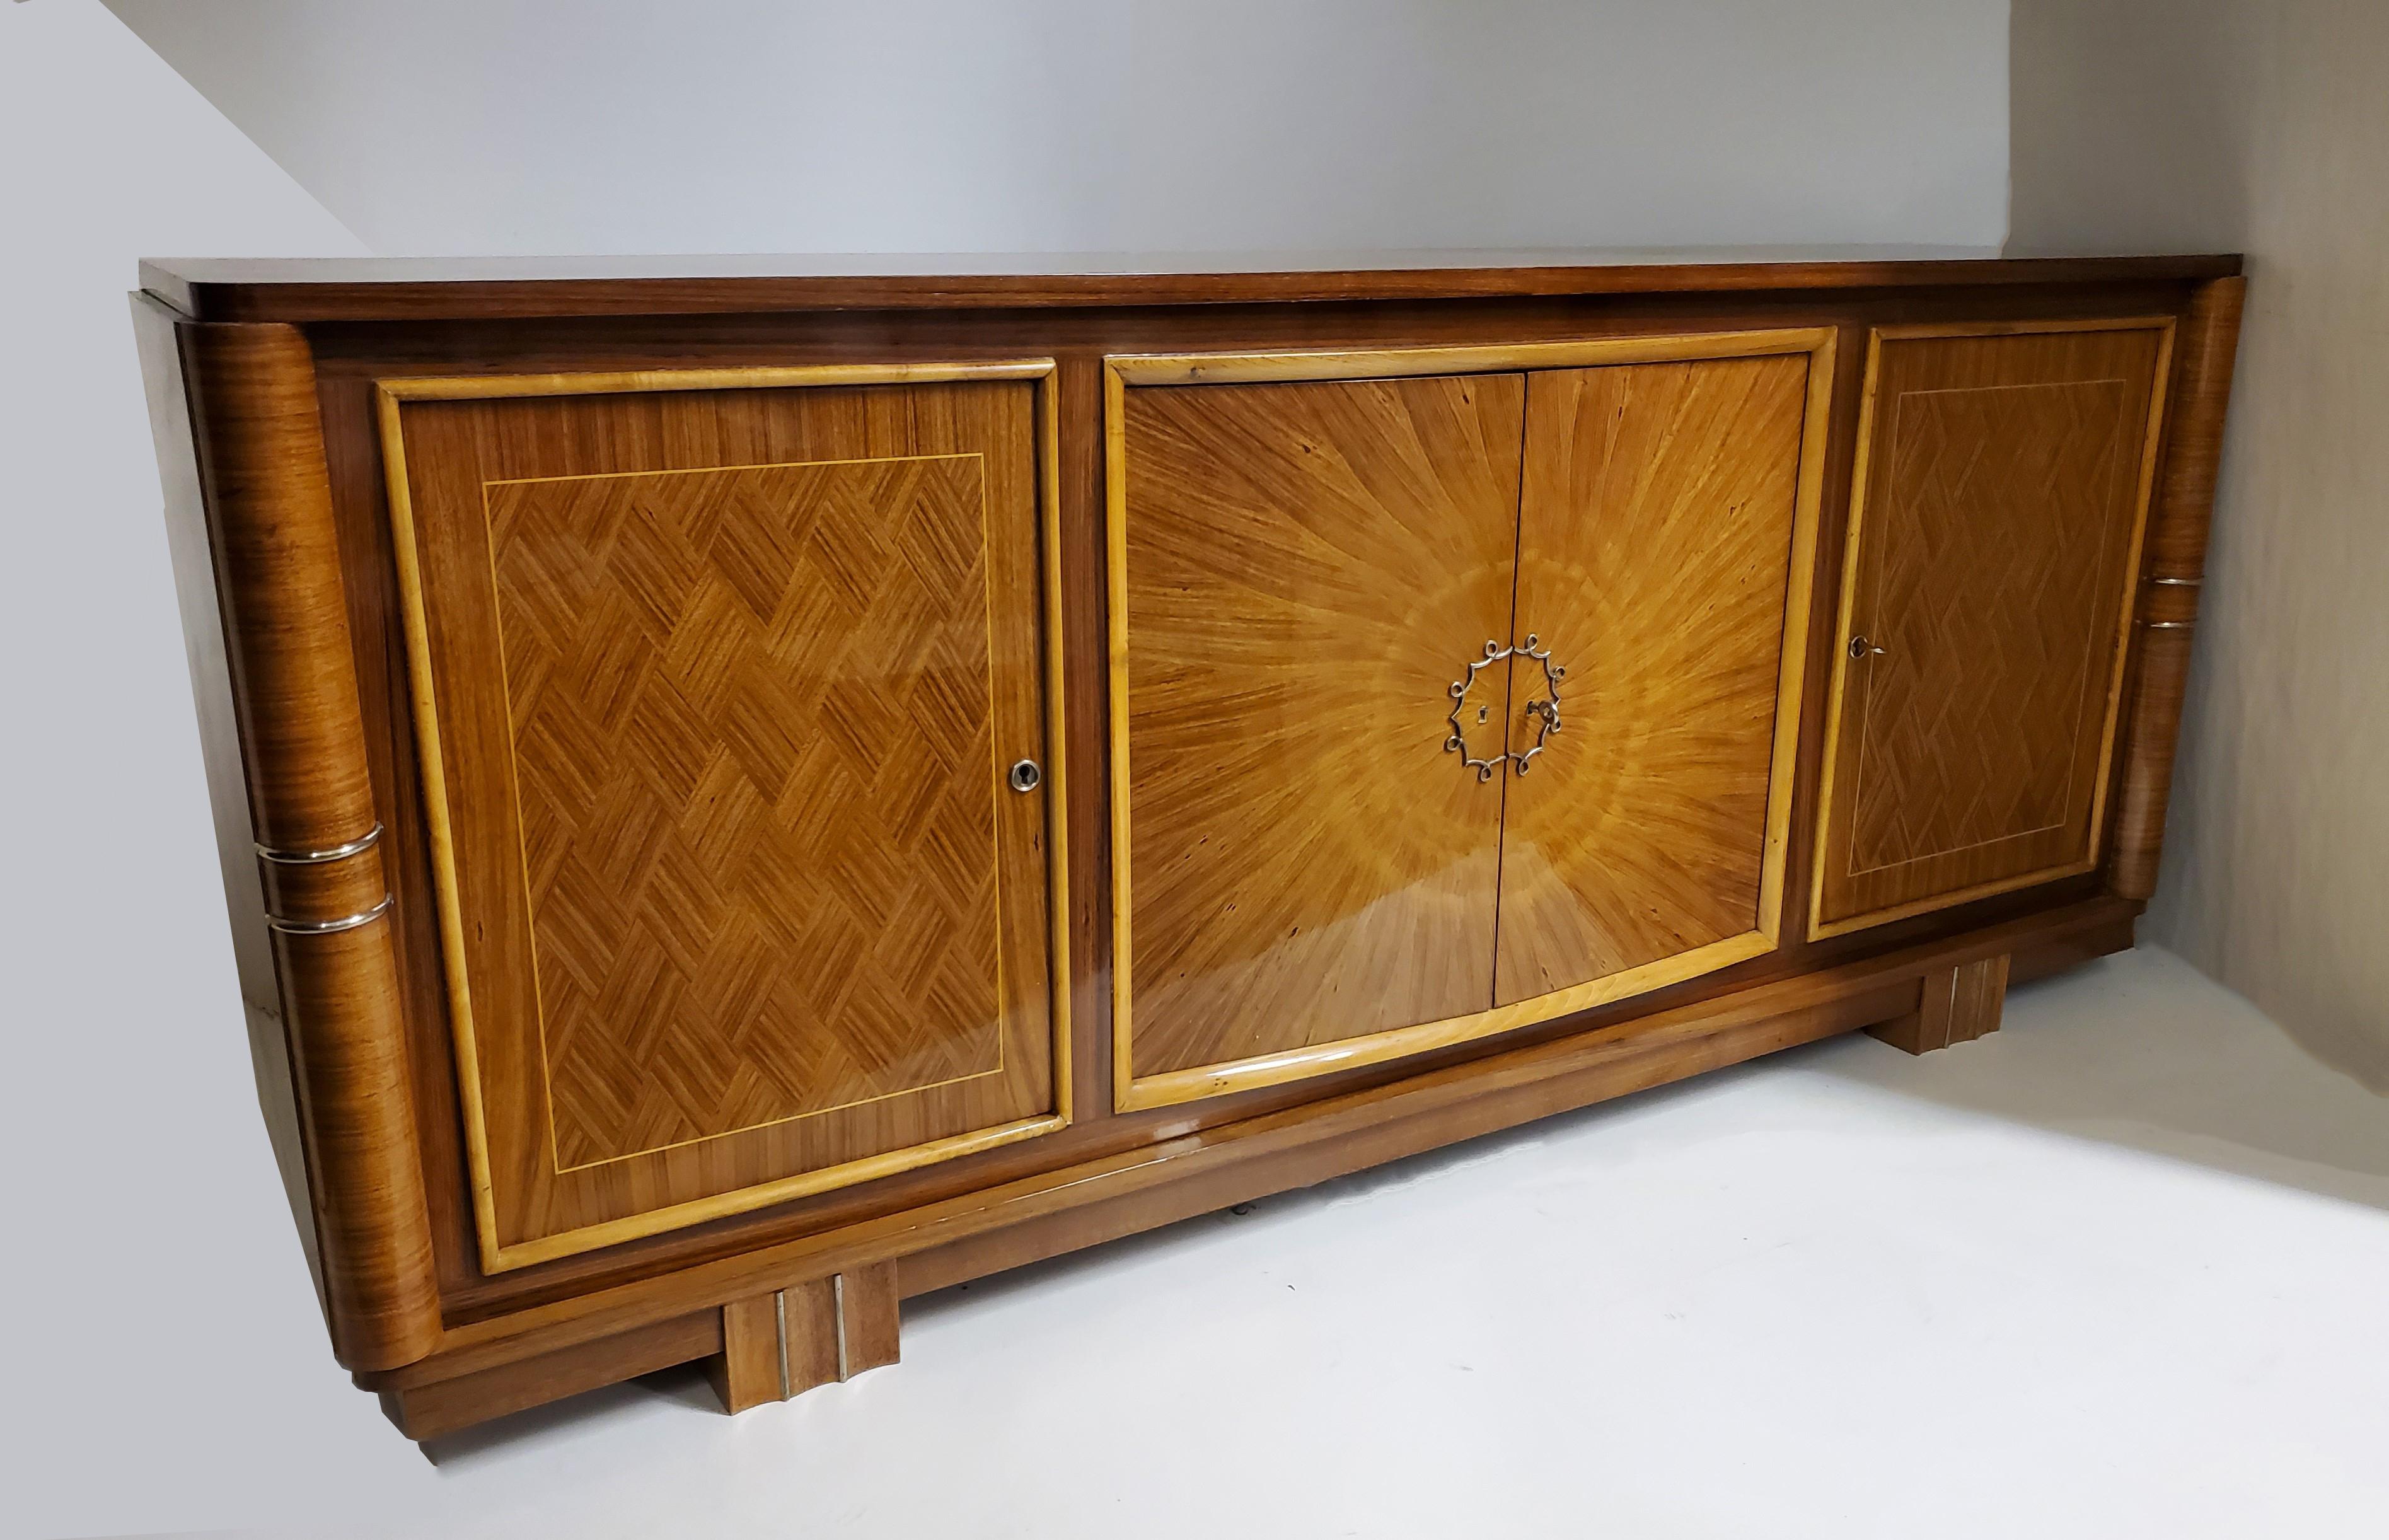 A beautifully crafted original French Modern three door wood cabinet with sunburst center doors and parquetry side doors and top attributed to Lucien Rollin. The sunburst center doors feature an inlaid wood radiating pattern that mimics the rays of